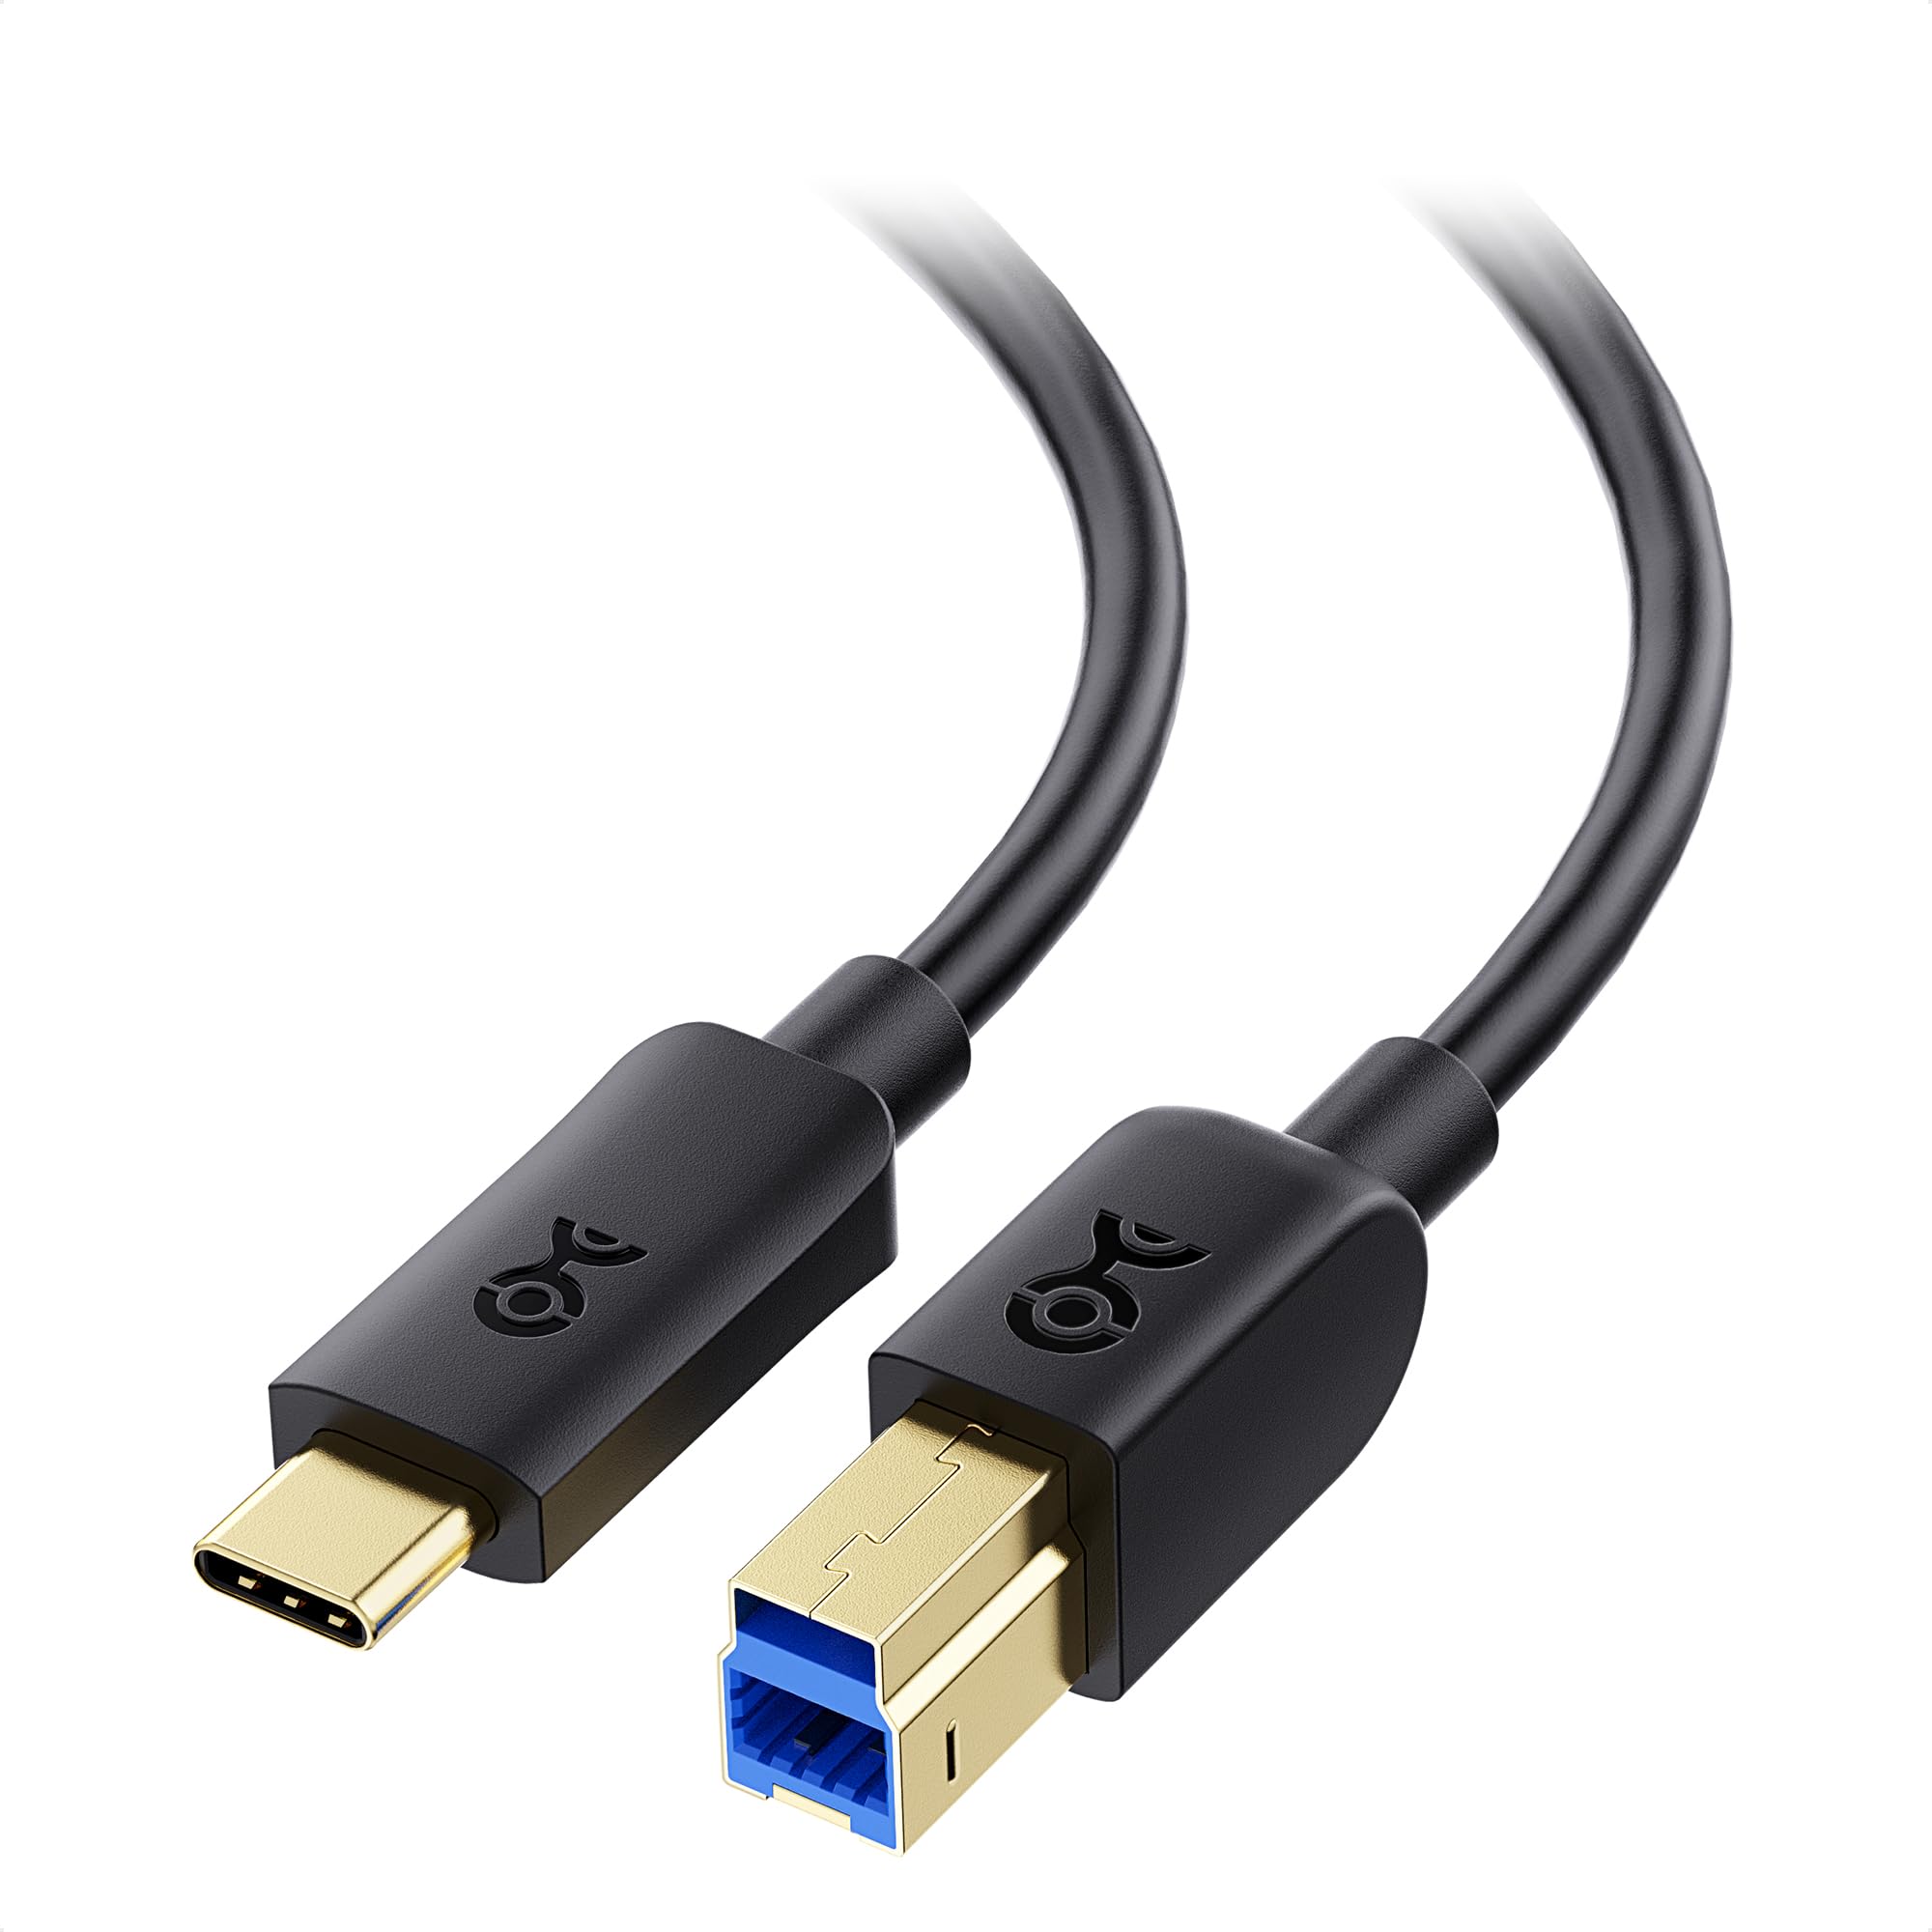 Try using a different USB port on the PC.
Use a different USB cable, if available, to rule out any cable issues.